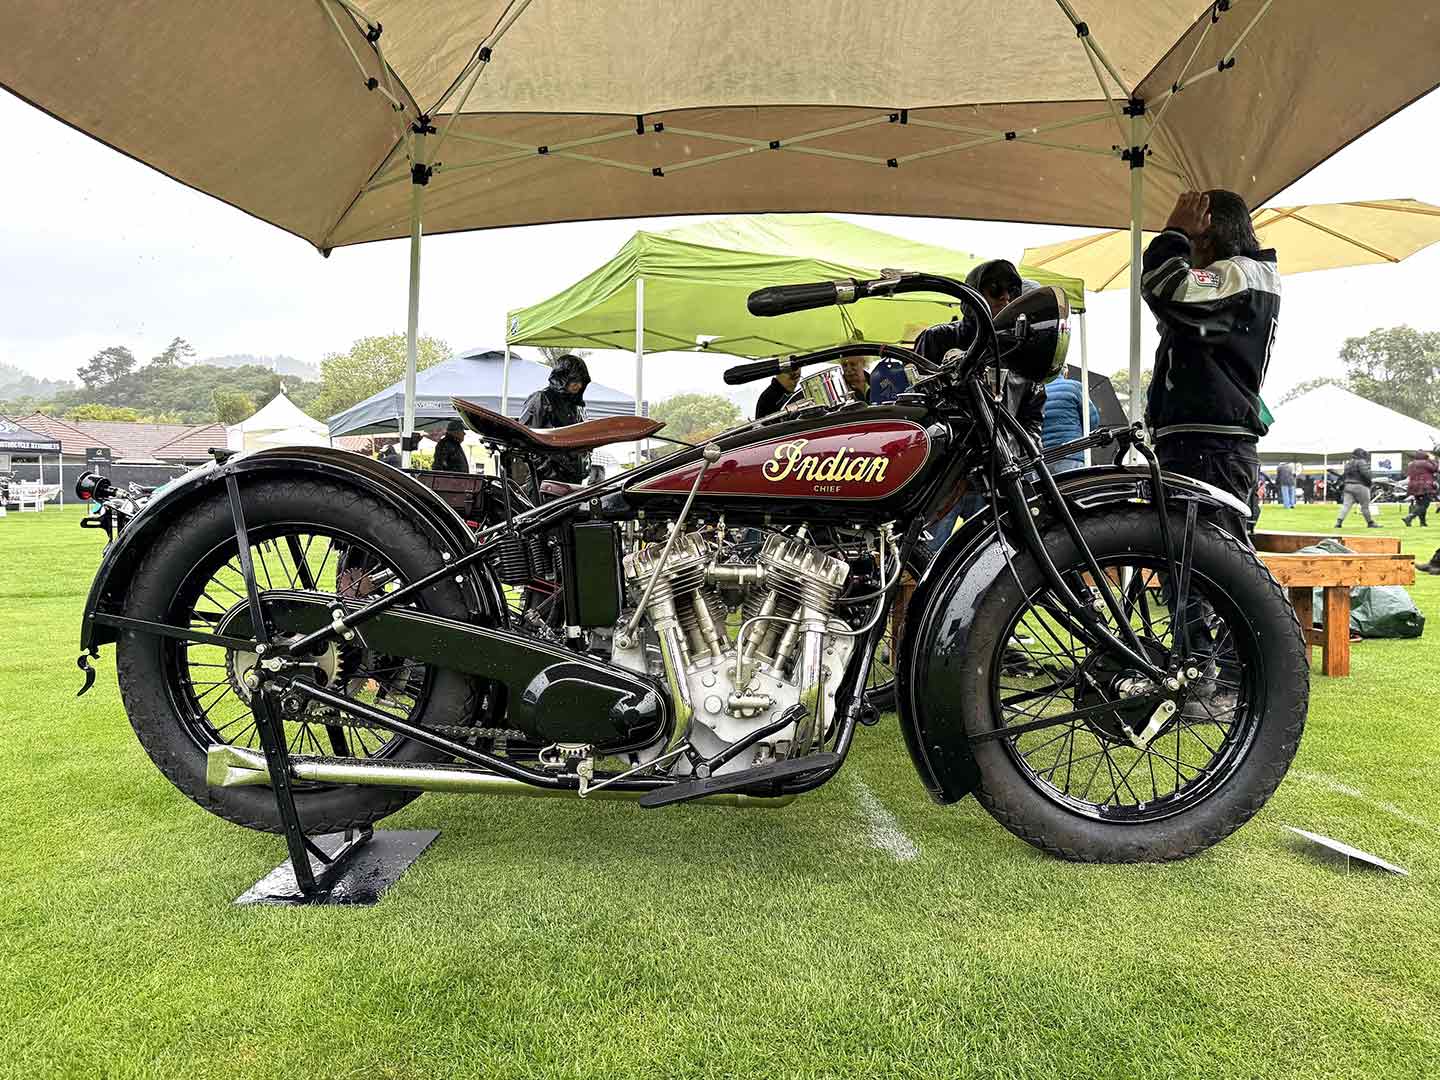 This lovely 1930 Indian Big Chief scooped up the Antique first place award presented by Bonhams.